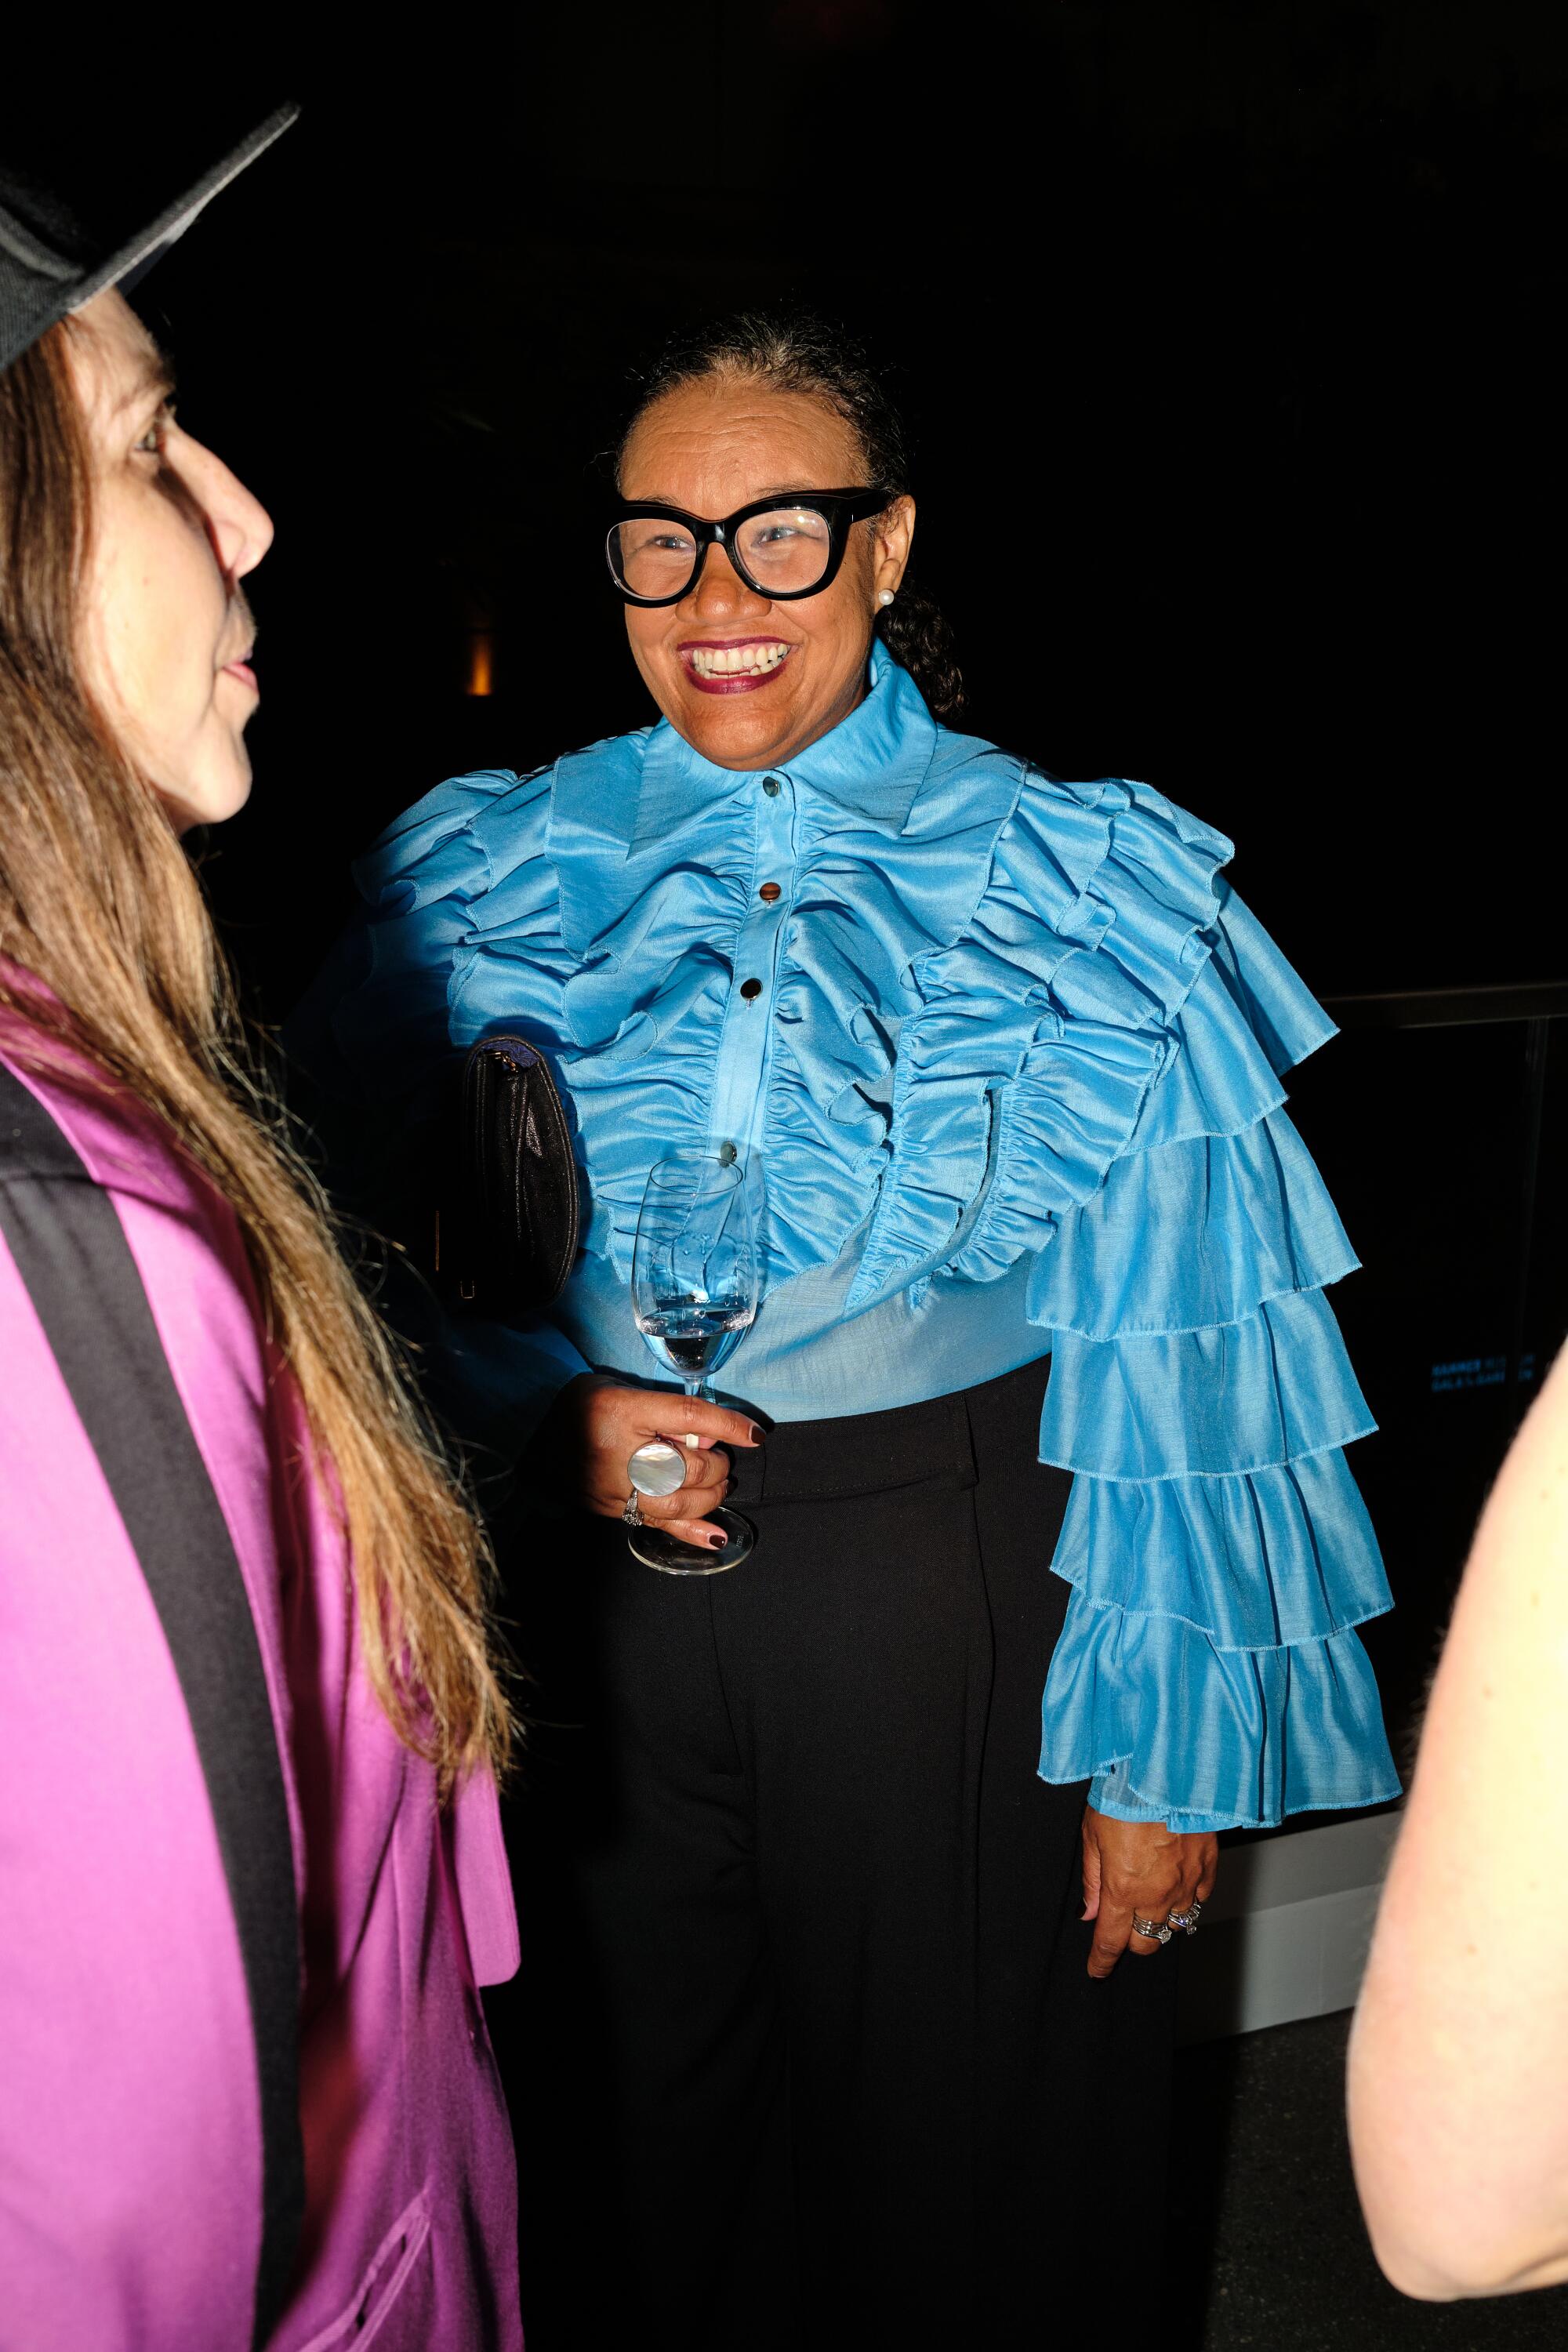 A woman in a bright blue ruffled top and thick black glasses smiles for a picture at the Hammer Museum gala.